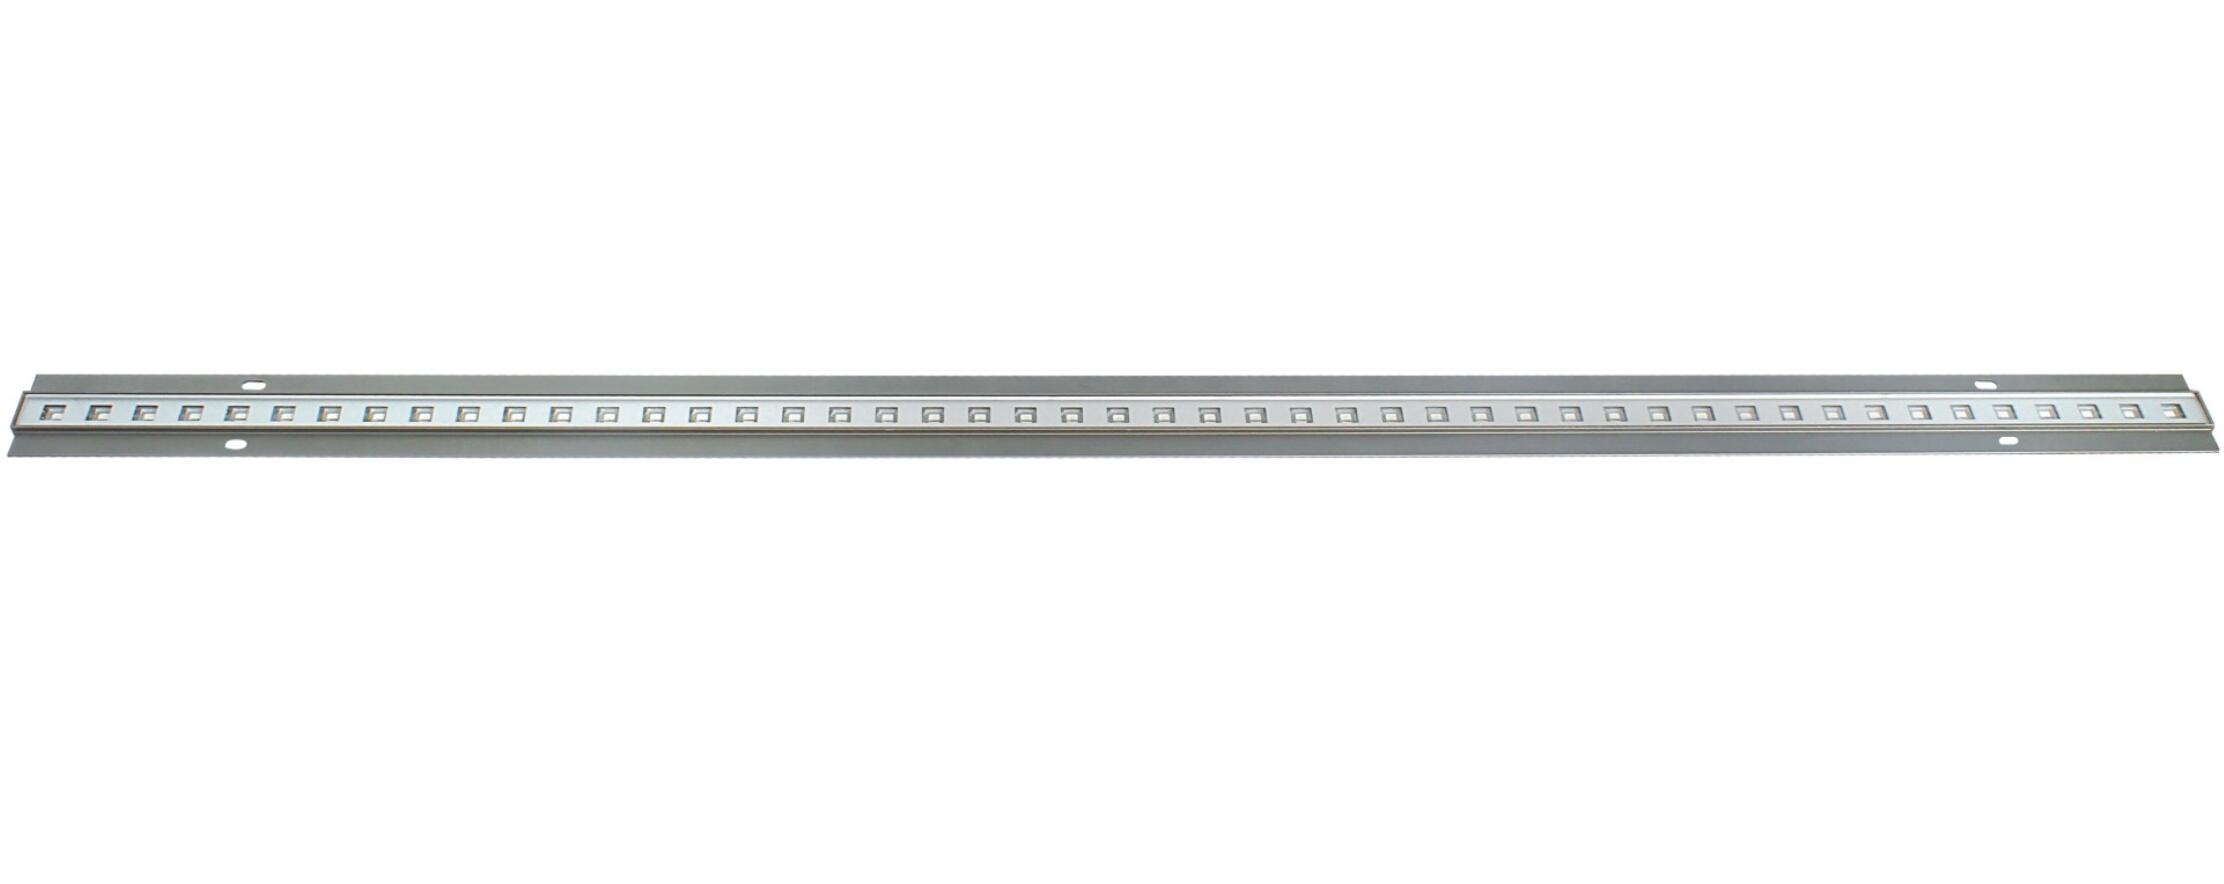 Direct view linear fixture